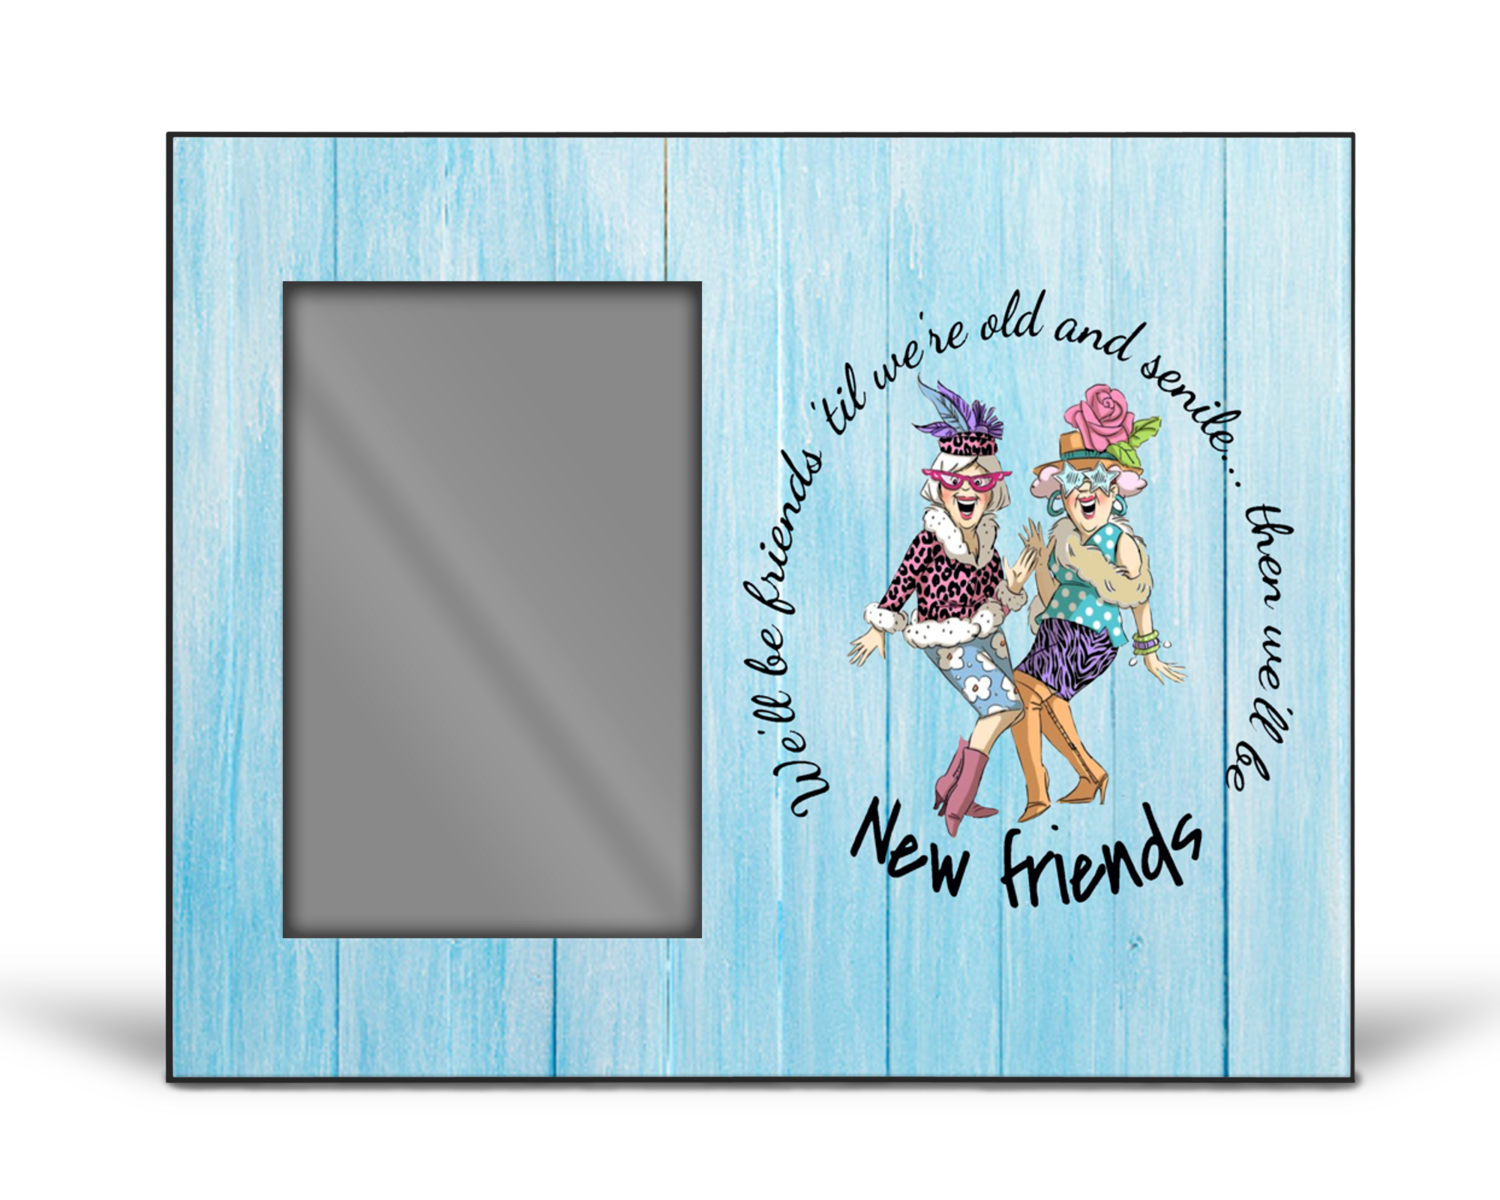 Crafting Picture Frame: WE'LL BE FRIENDS 'TILL WE'RE OLD AND SENILE...THEN WE'LL BE NEW FRIENDS